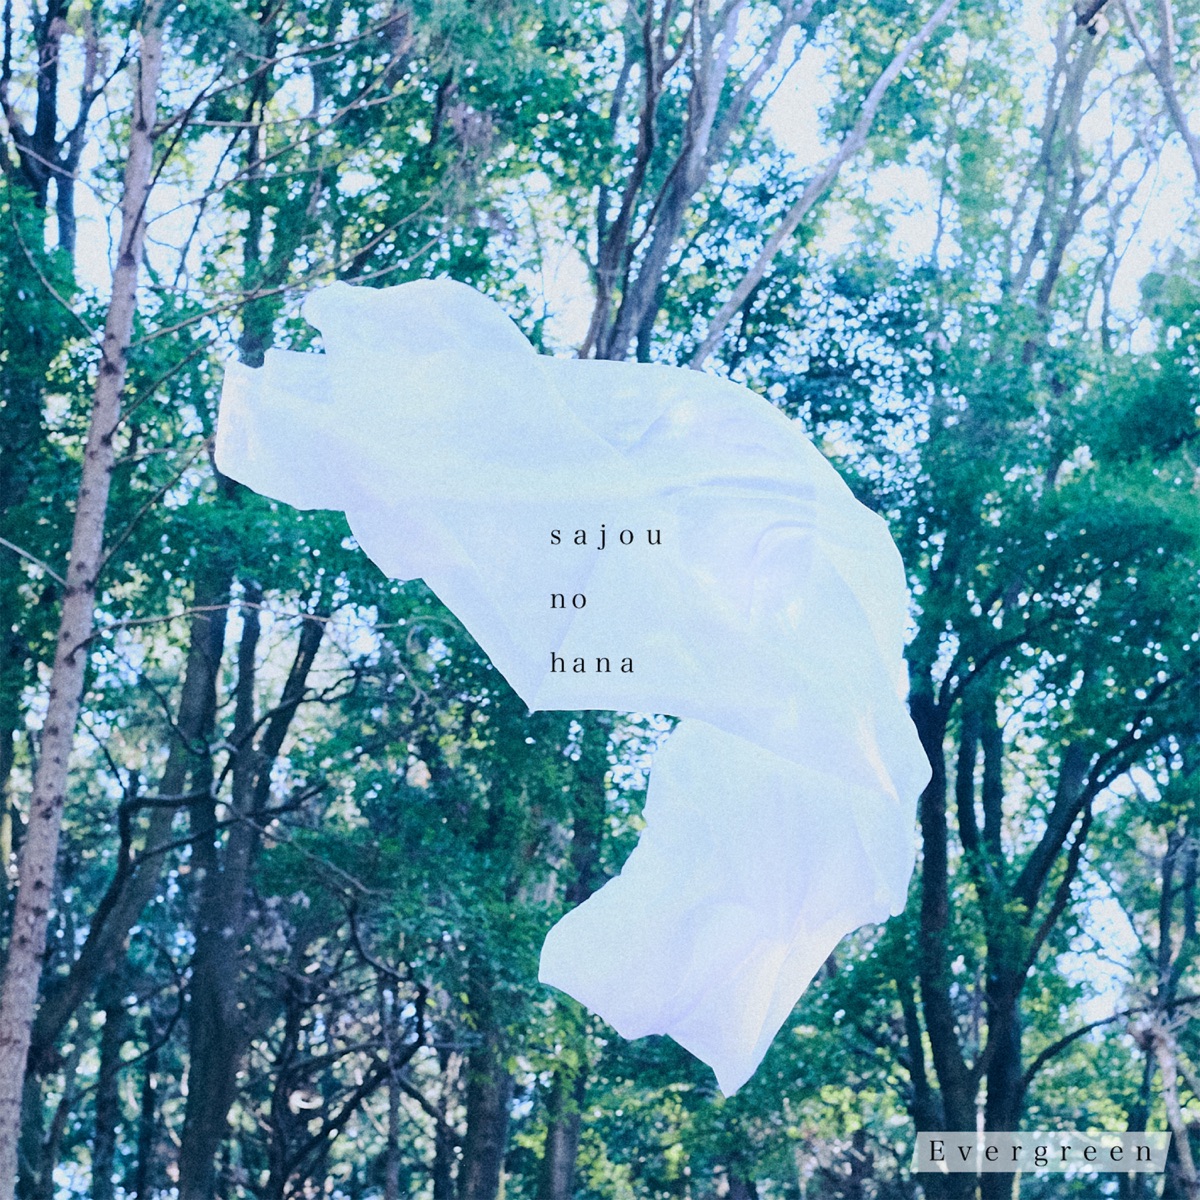 Cover art for『sajou no hana - Evergreen』from the release『Evergreen』